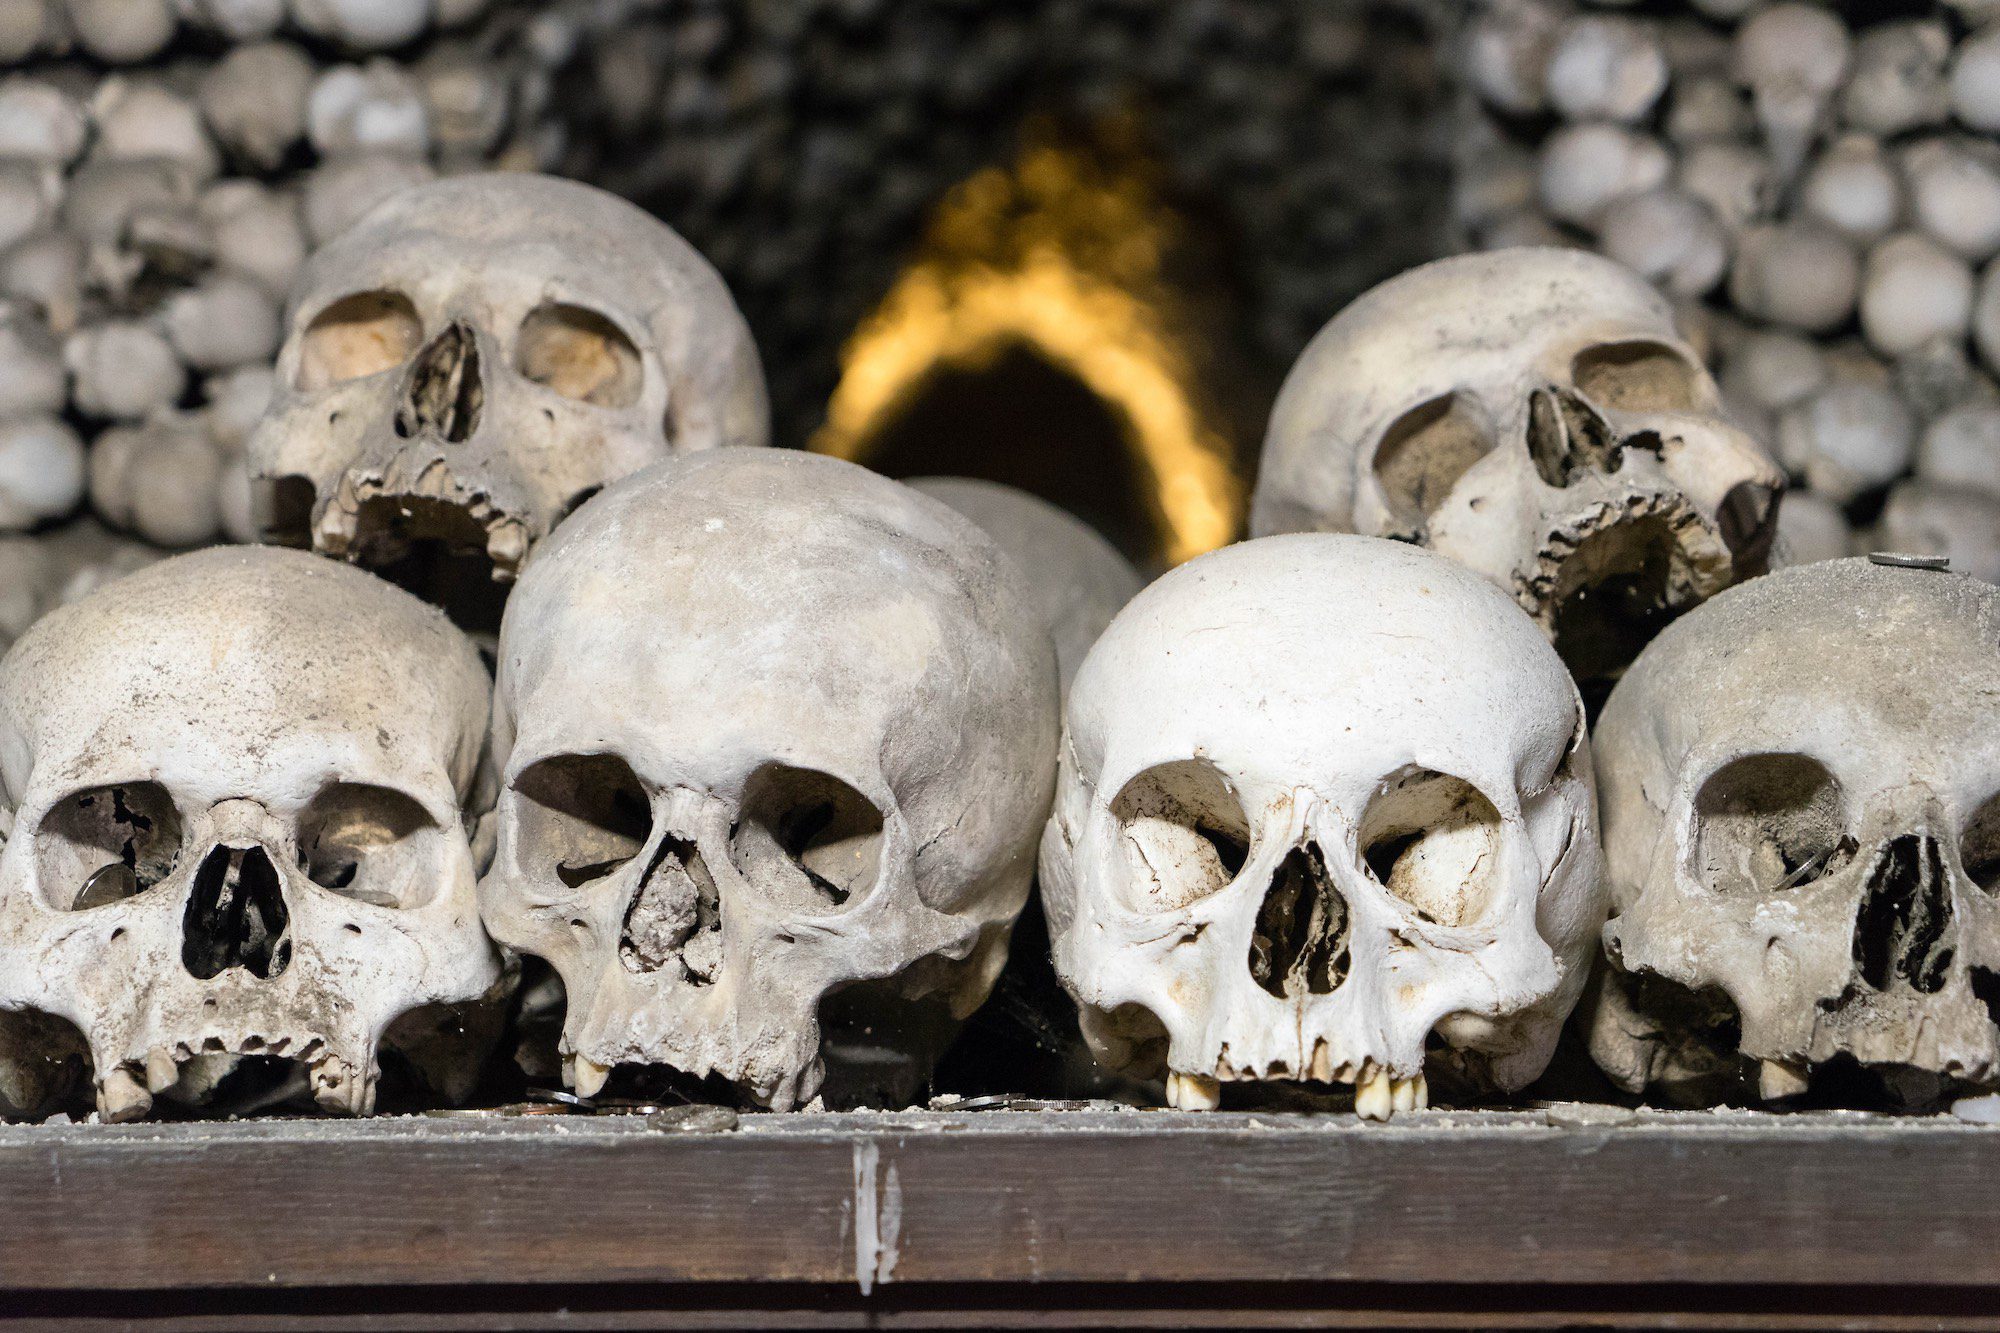 The image shows a row of human skulls arranged neatly on a shelf, with more skulls and bones visible in the blurred background.